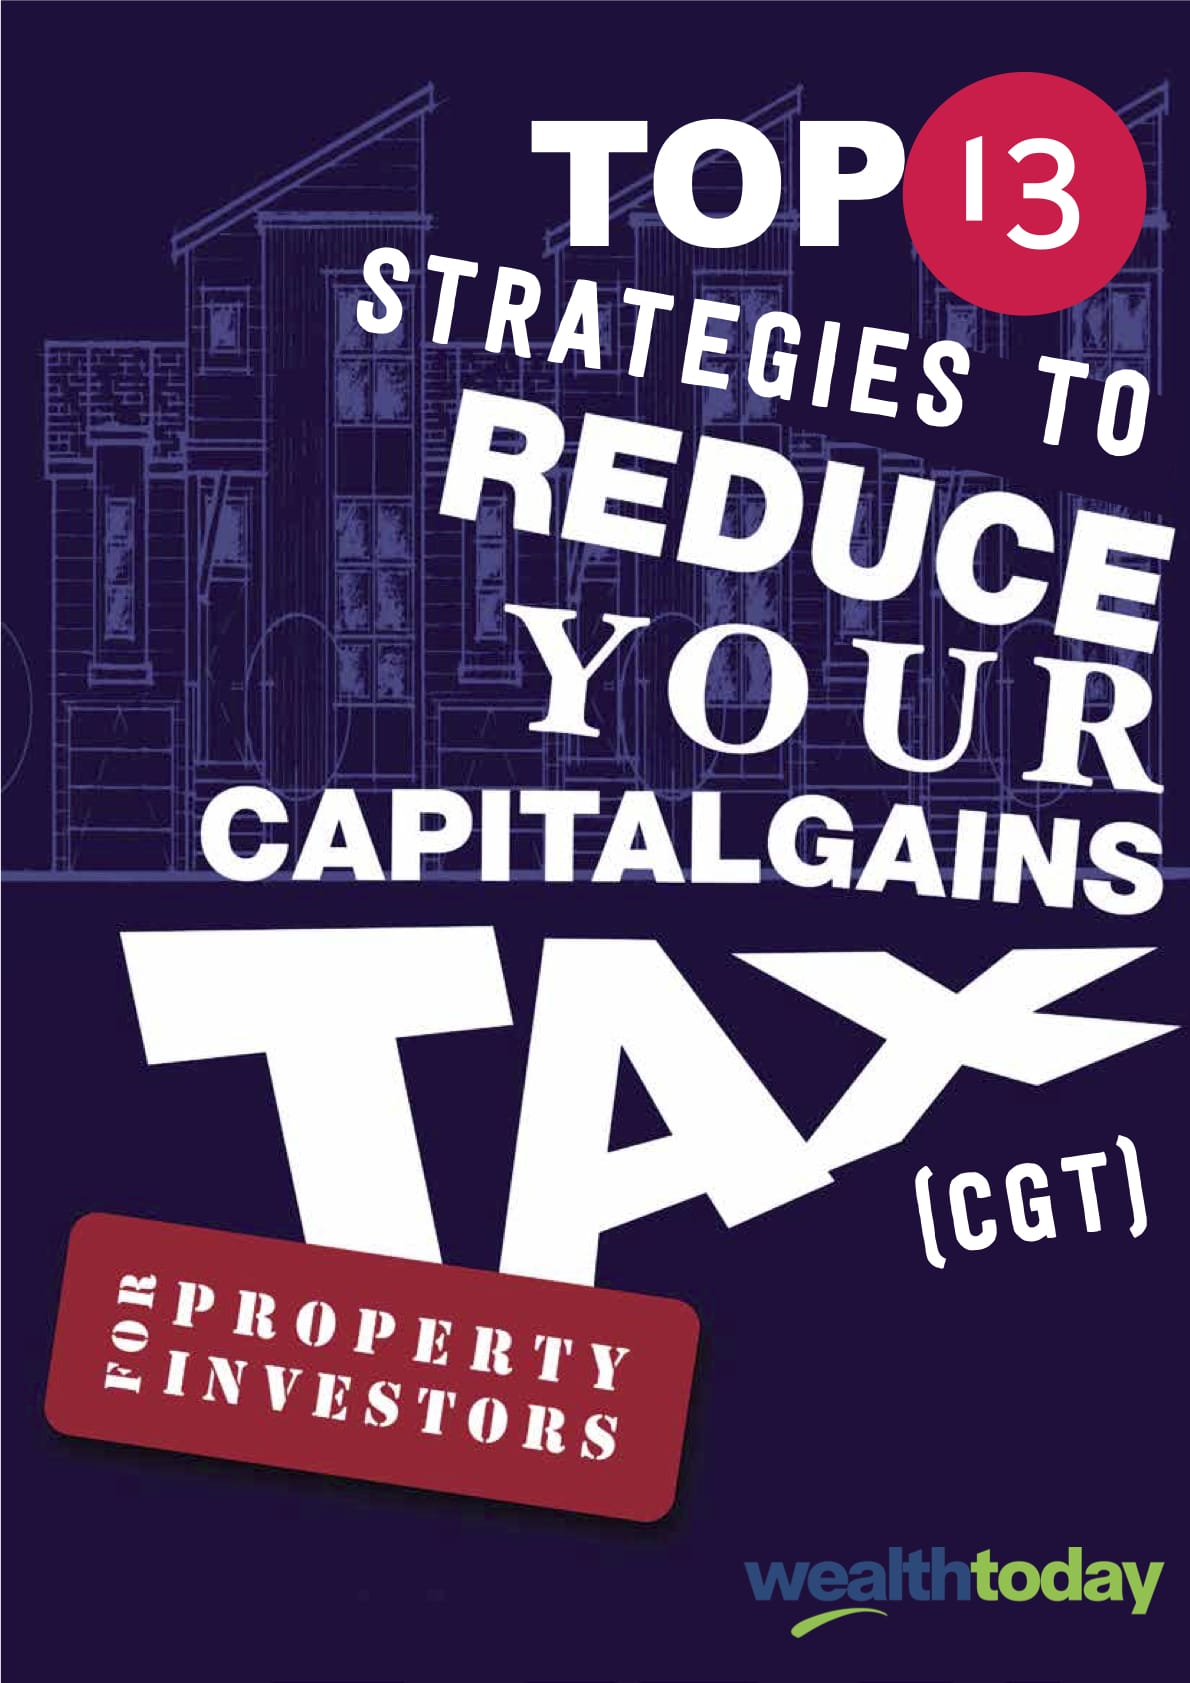 Top-13-Strategies-to-Reduce-Capital-Gains-Tax-CGT-for-Property-Investors-WT